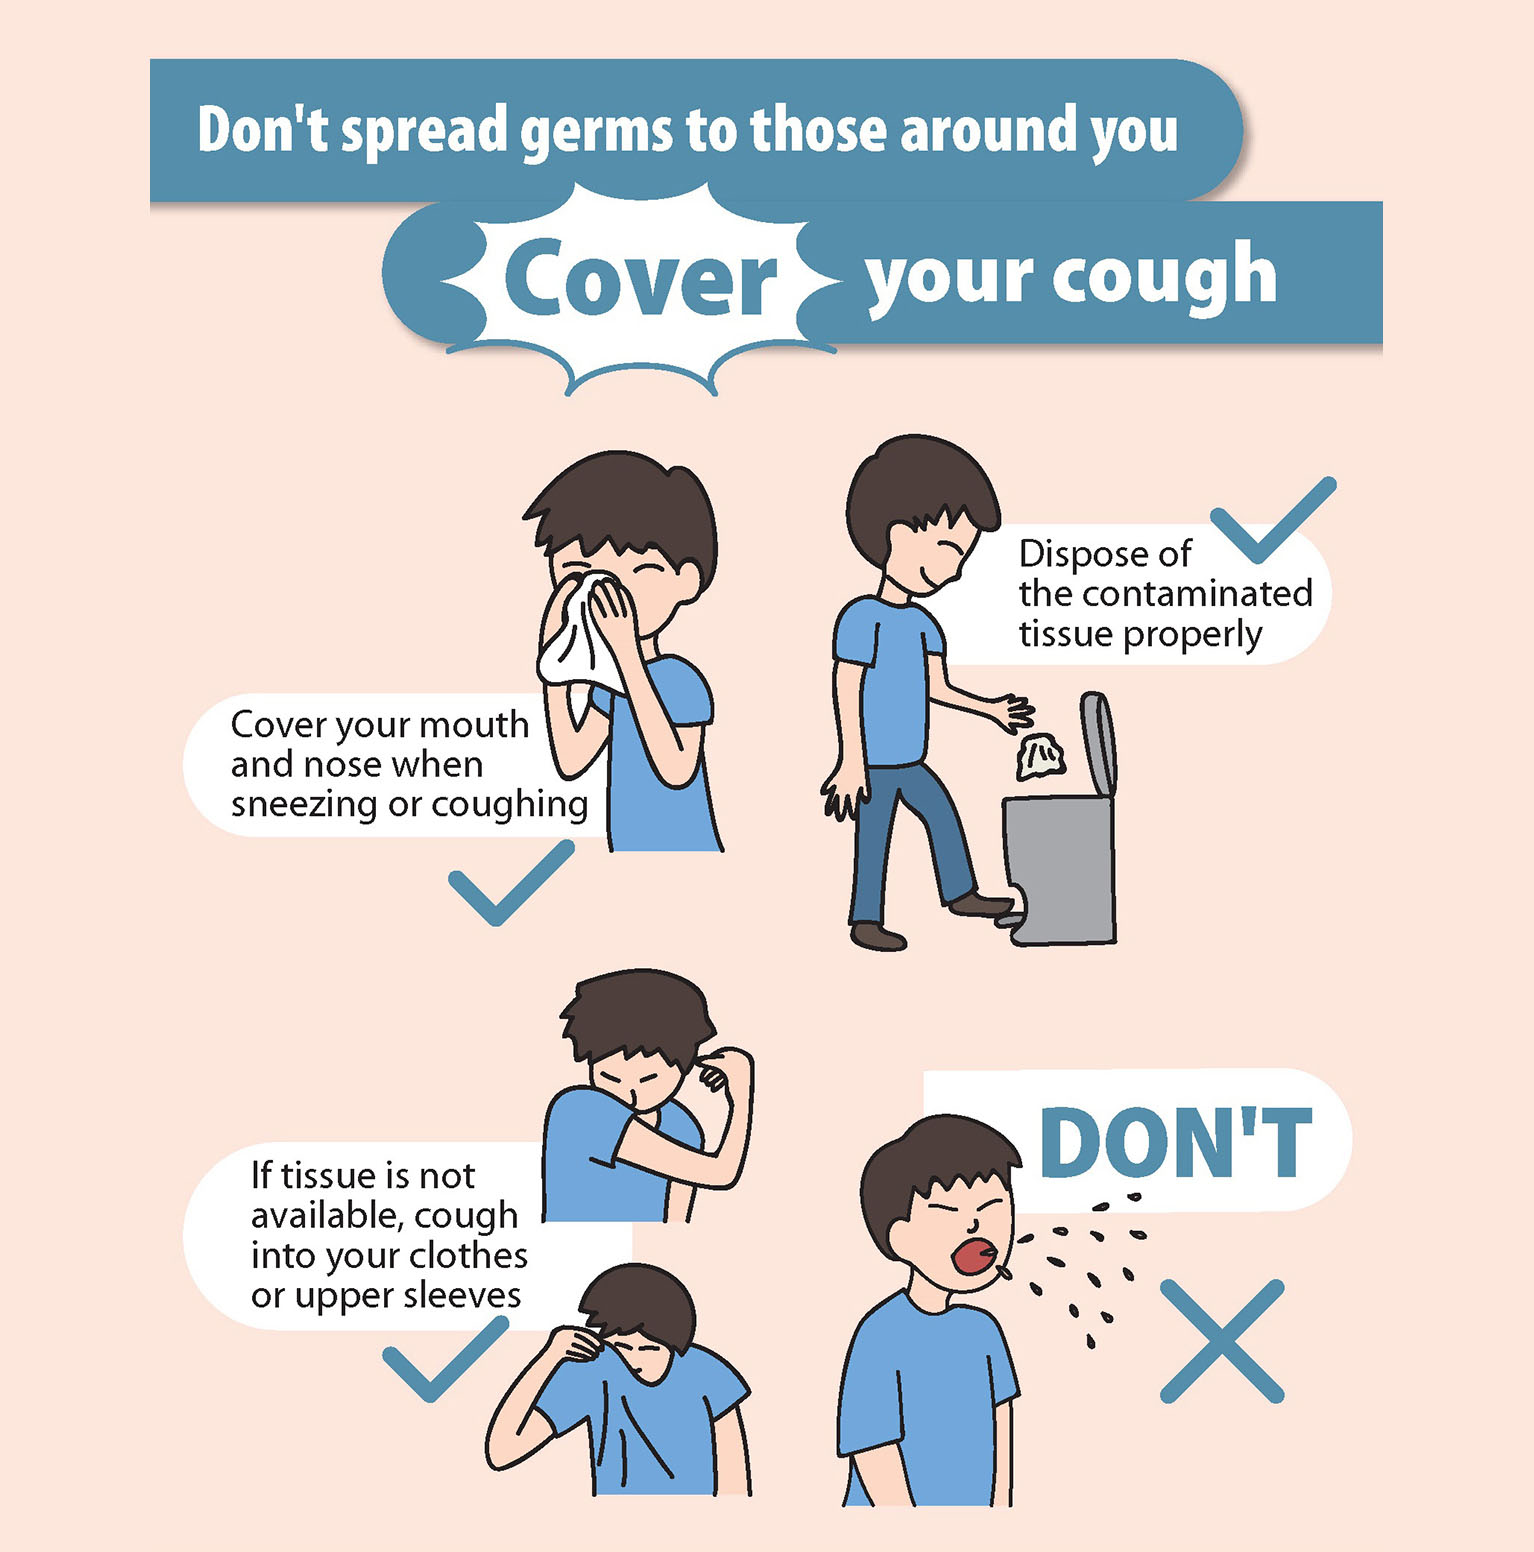 Don't spread germs to those around you, Cover your cough